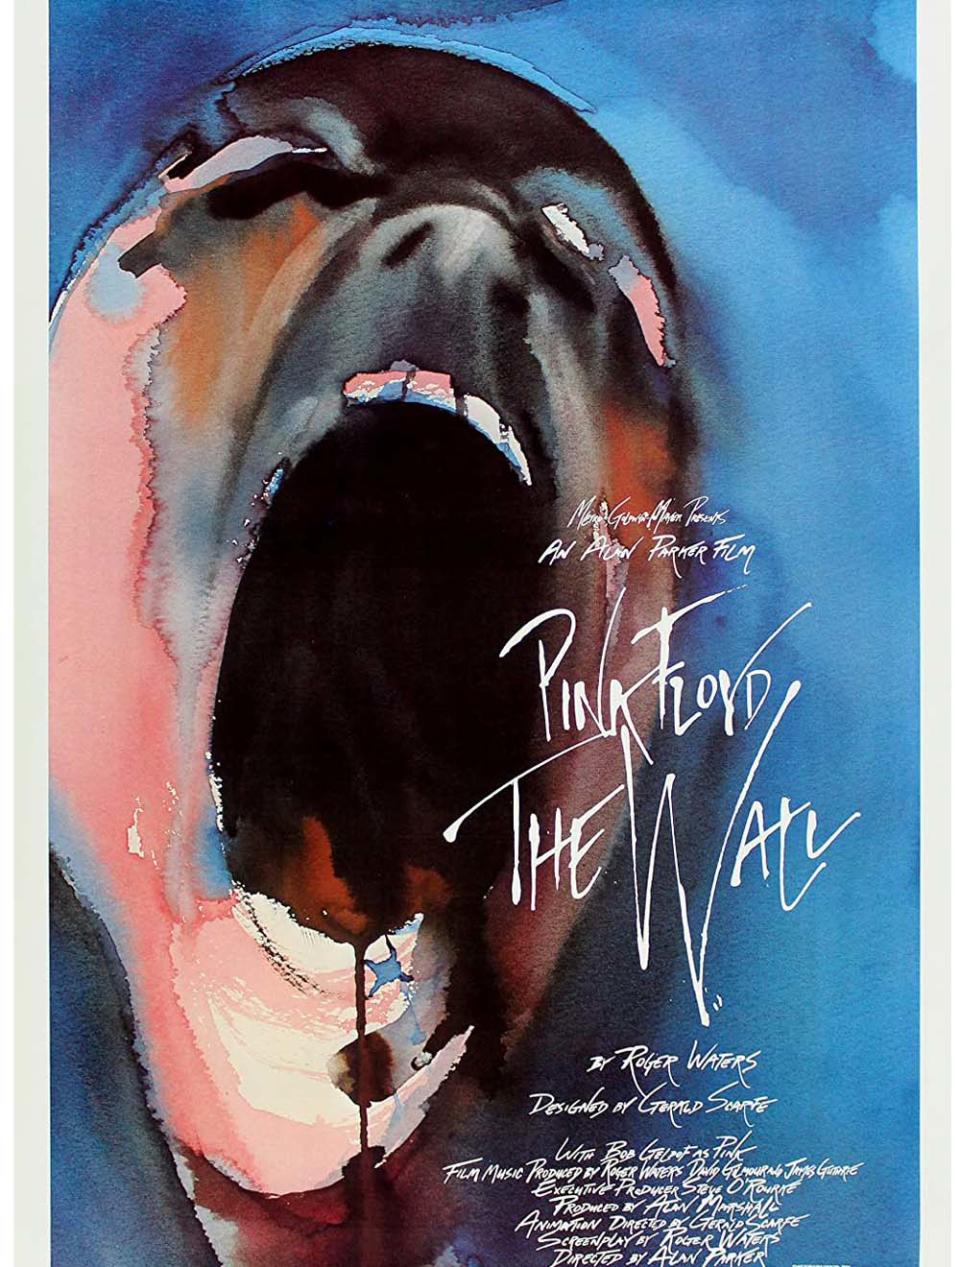 "Pink Floyd: The Wall" will be shown at 7:30 p.m. on Saturday at Canton Palace Theatre. Tickets are $10.